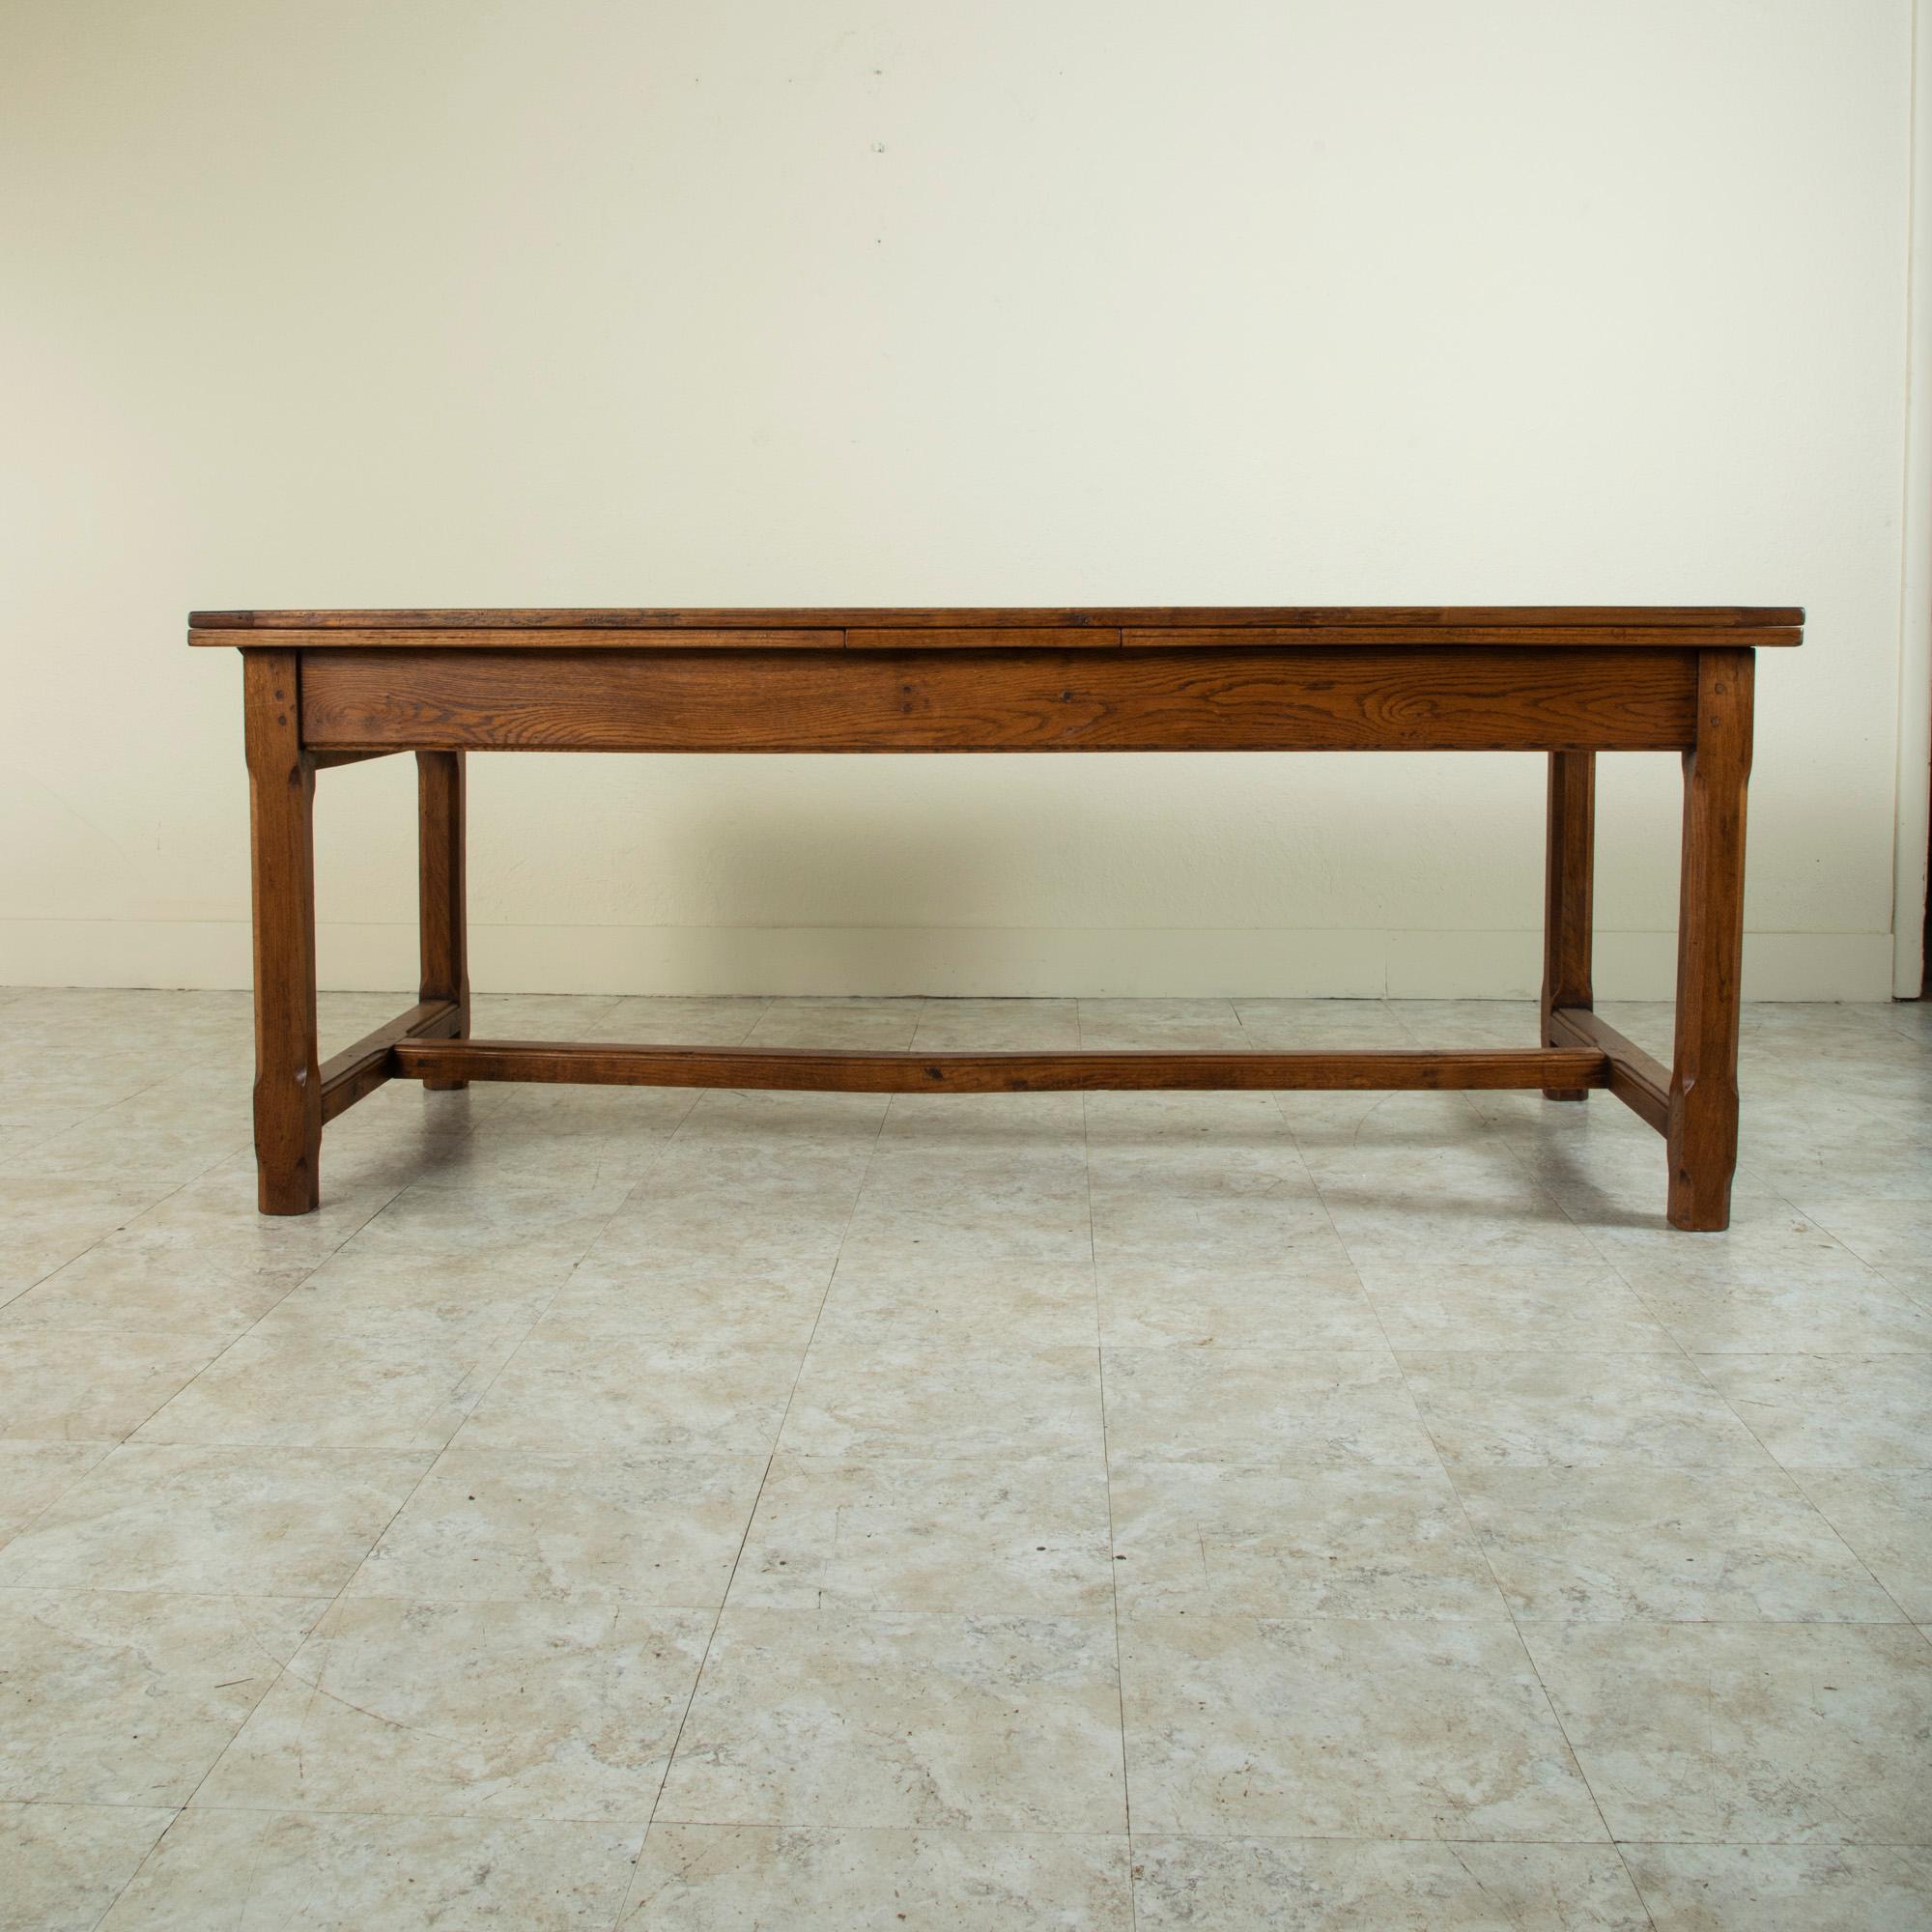 Originally from a manor house in Normandy, France, this French artisan made oak farm table or dining table from the turn of the 20th century features an impressive draw leaf top that measures nearly twelve feet when fully extended. Each leaf